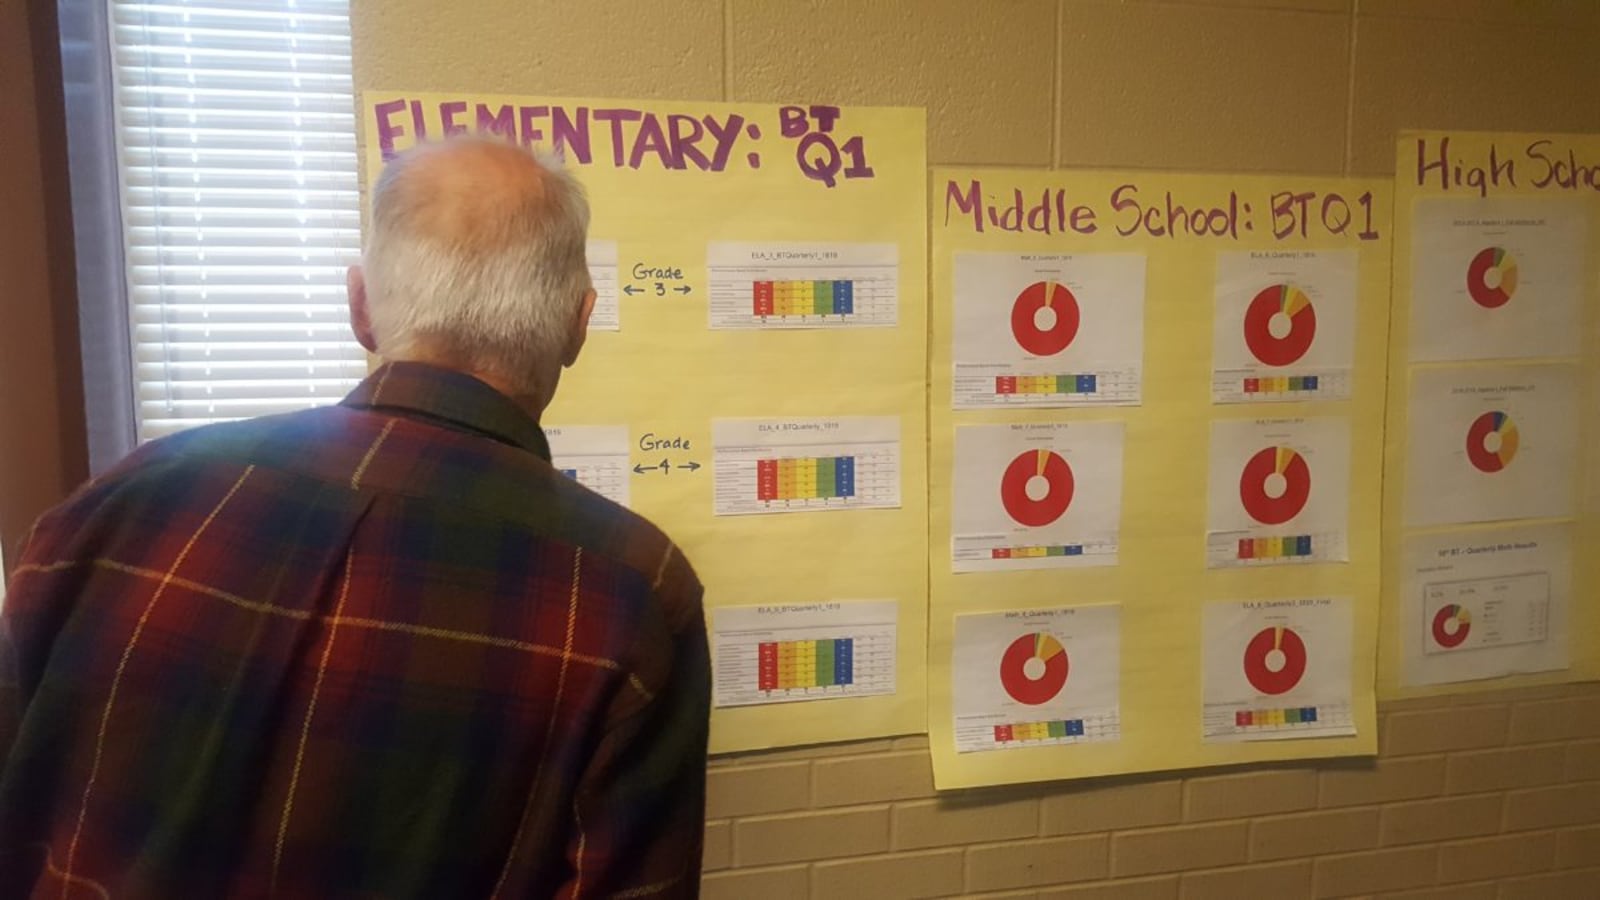 Adams 14 leaders took a close look at district data during an October meeting. (Photo by Yesenia Robles, Chalkbeat)